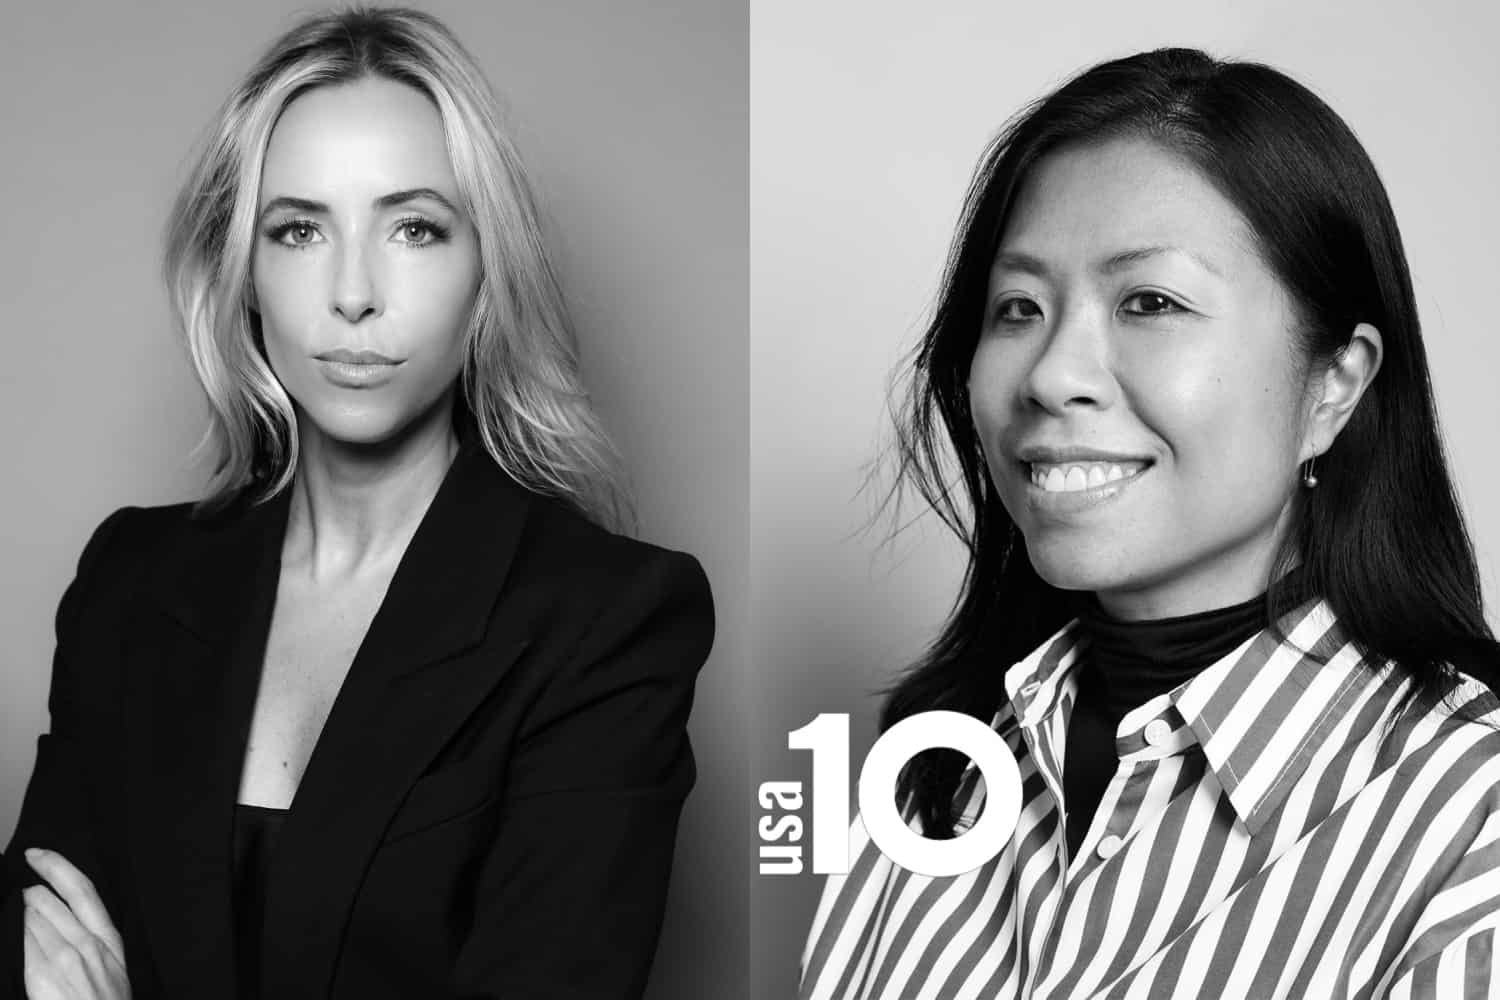 10 Magazine USA To Launch, Julie Beynon Named VP Of Communications & Marketing A..